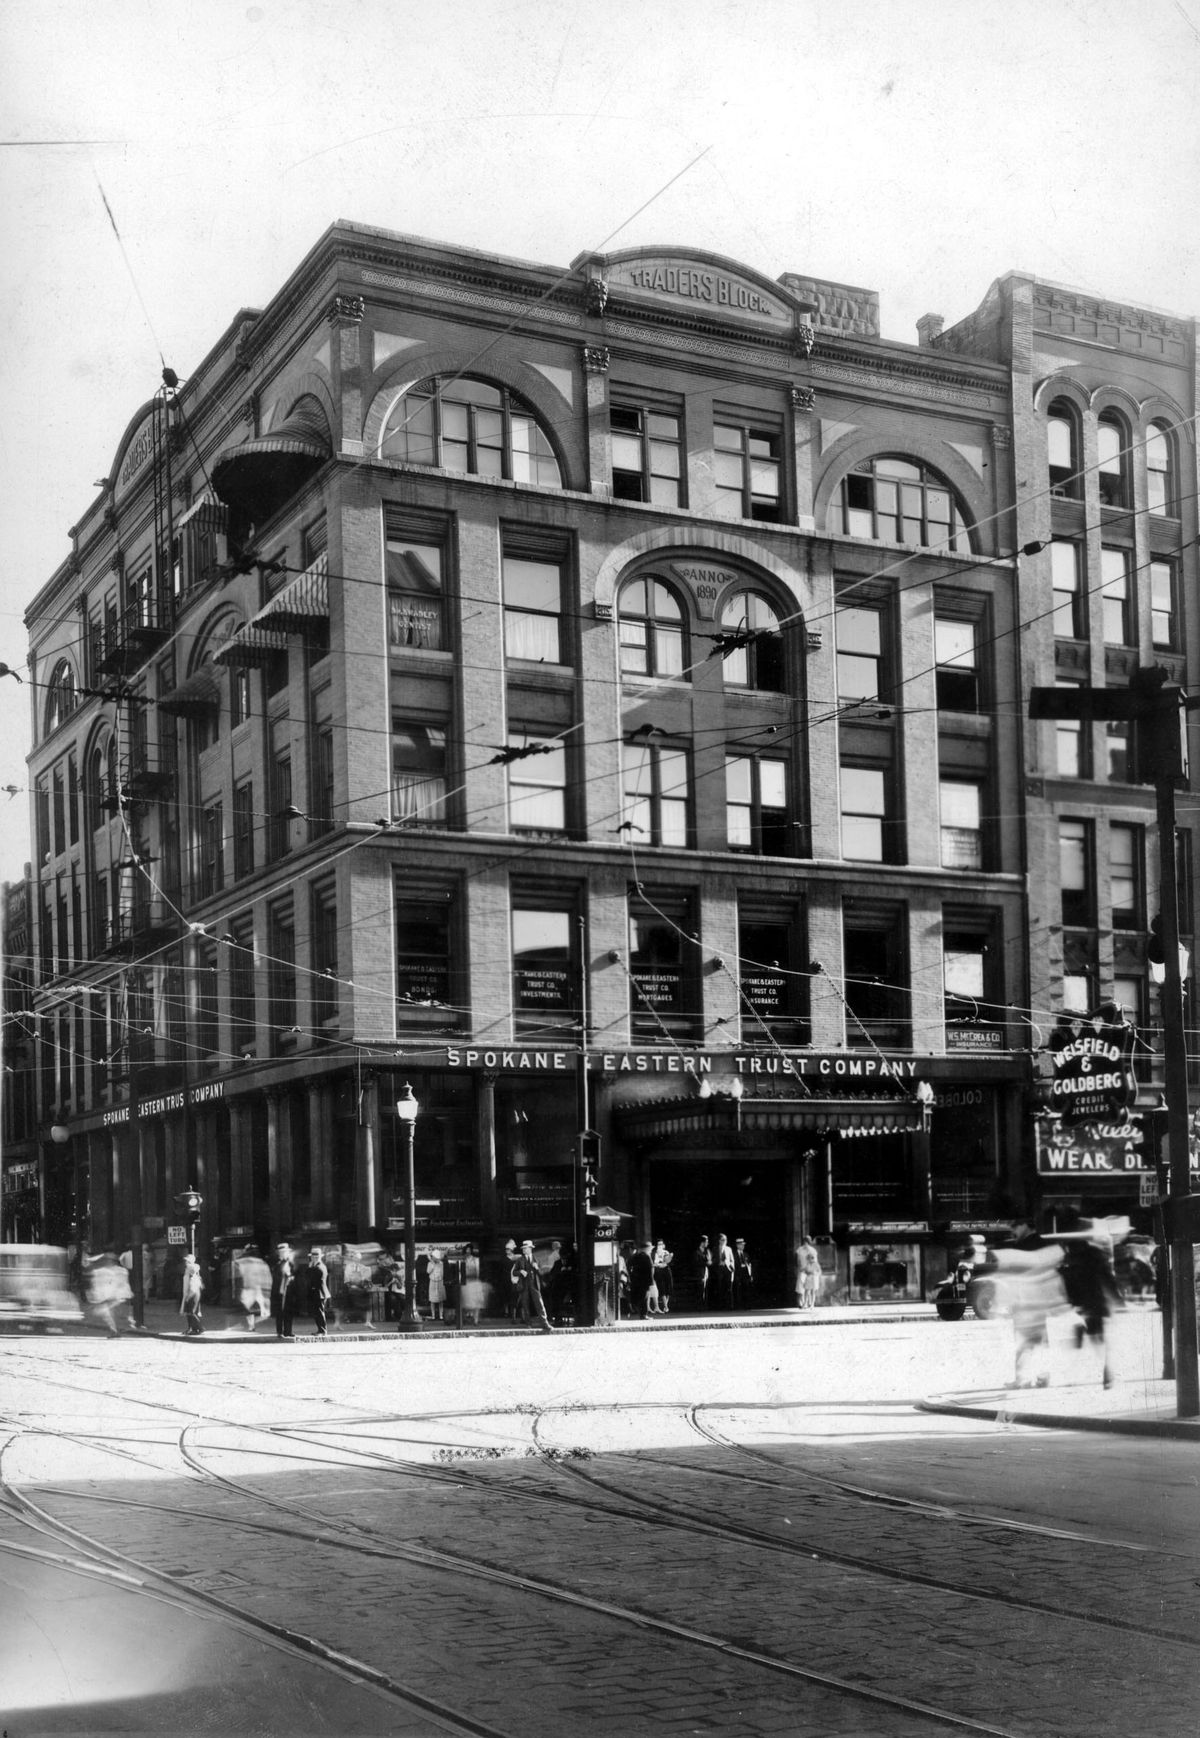 The Spokane and Eastern Trust Company building, pictured in 1930, a year before it was razed. (File)